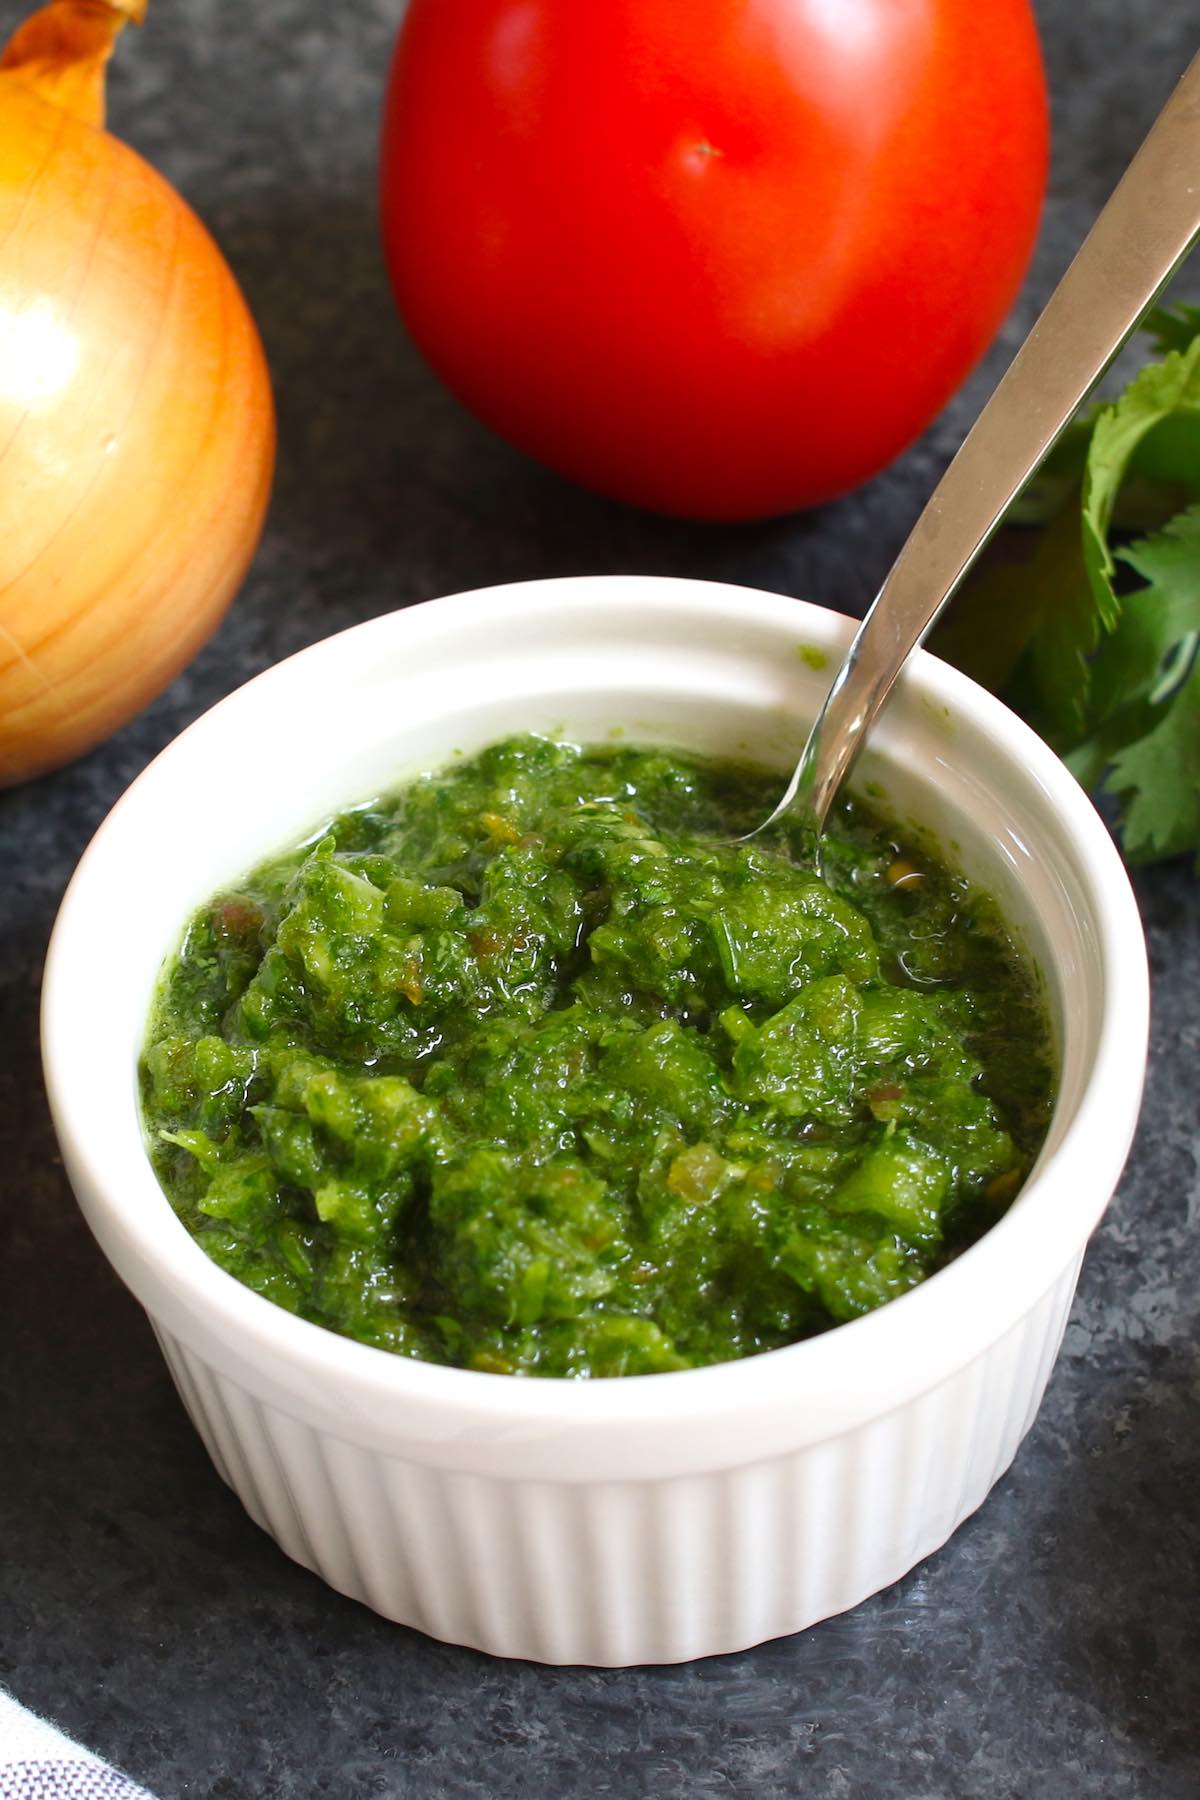 Sofrito is an aromatic sauce that’s mild and sweet with a little kick. It’s a popular condiment for many Puerto Rican dishes and other Spanish recipes. 